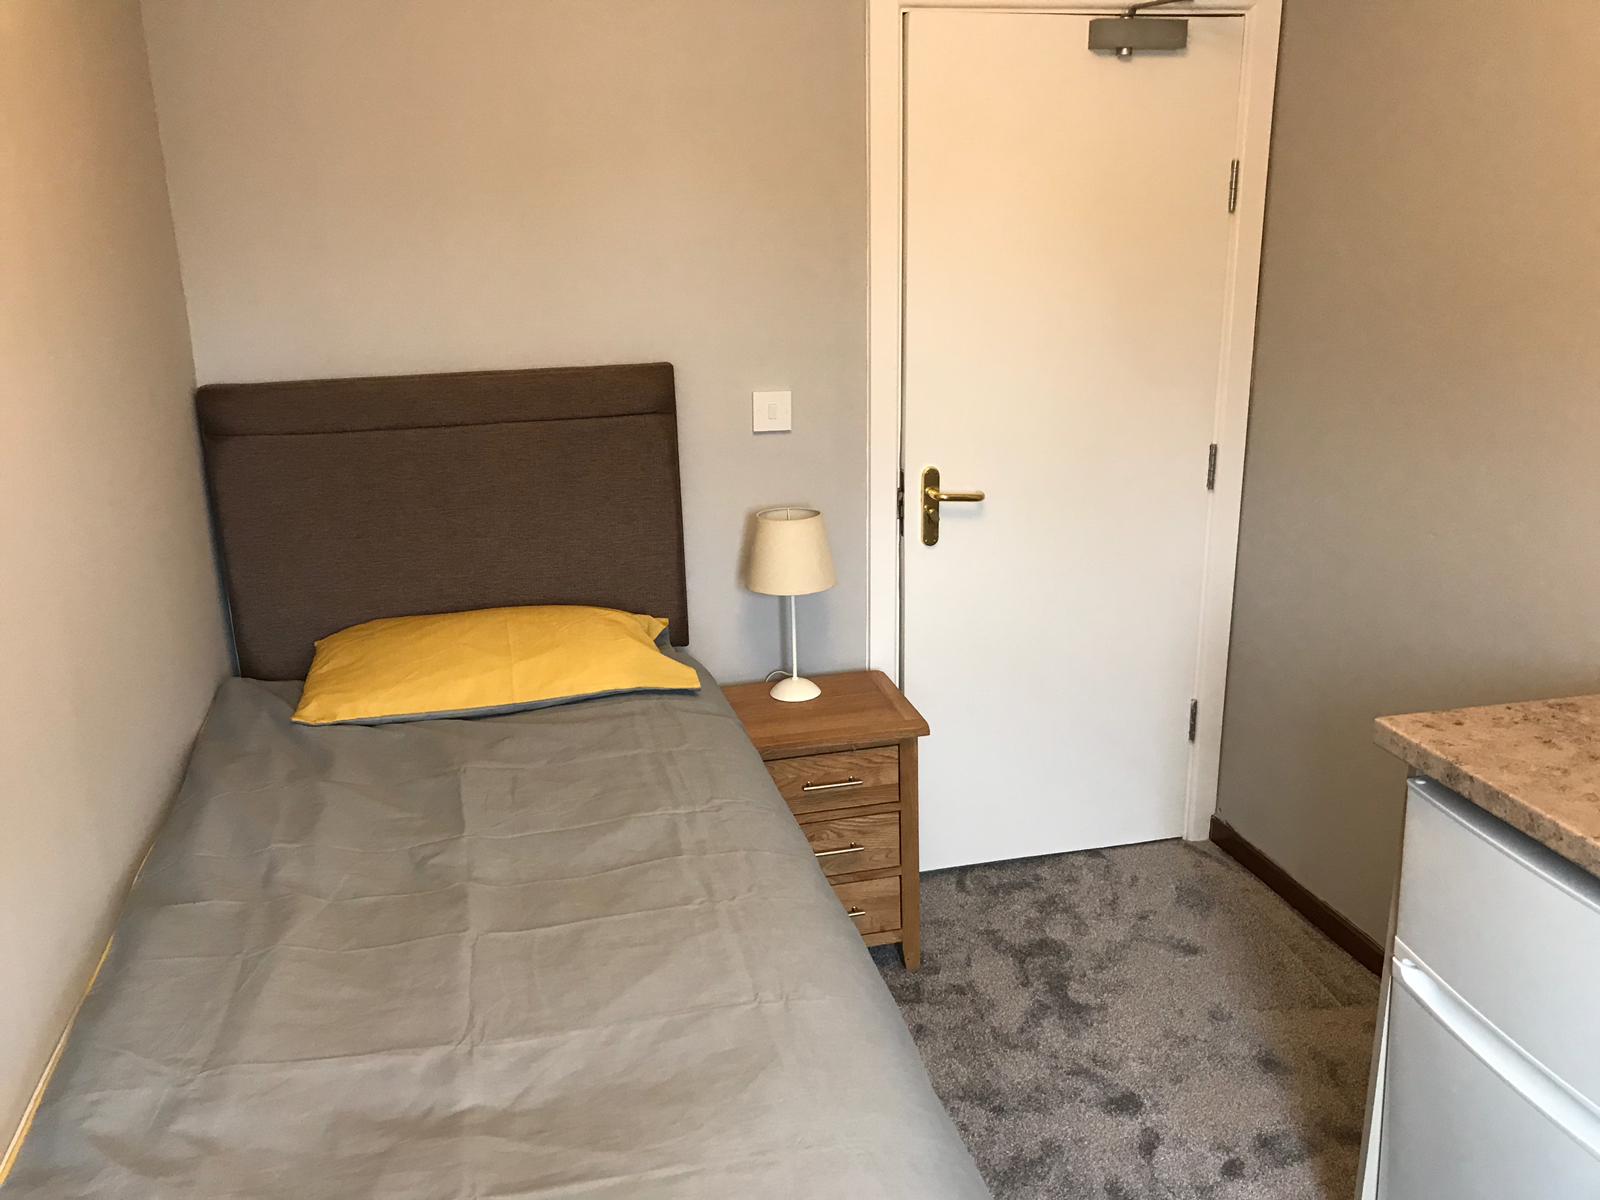 1 Bedroom House Share/Rent A Room Let in Birmingham, B23